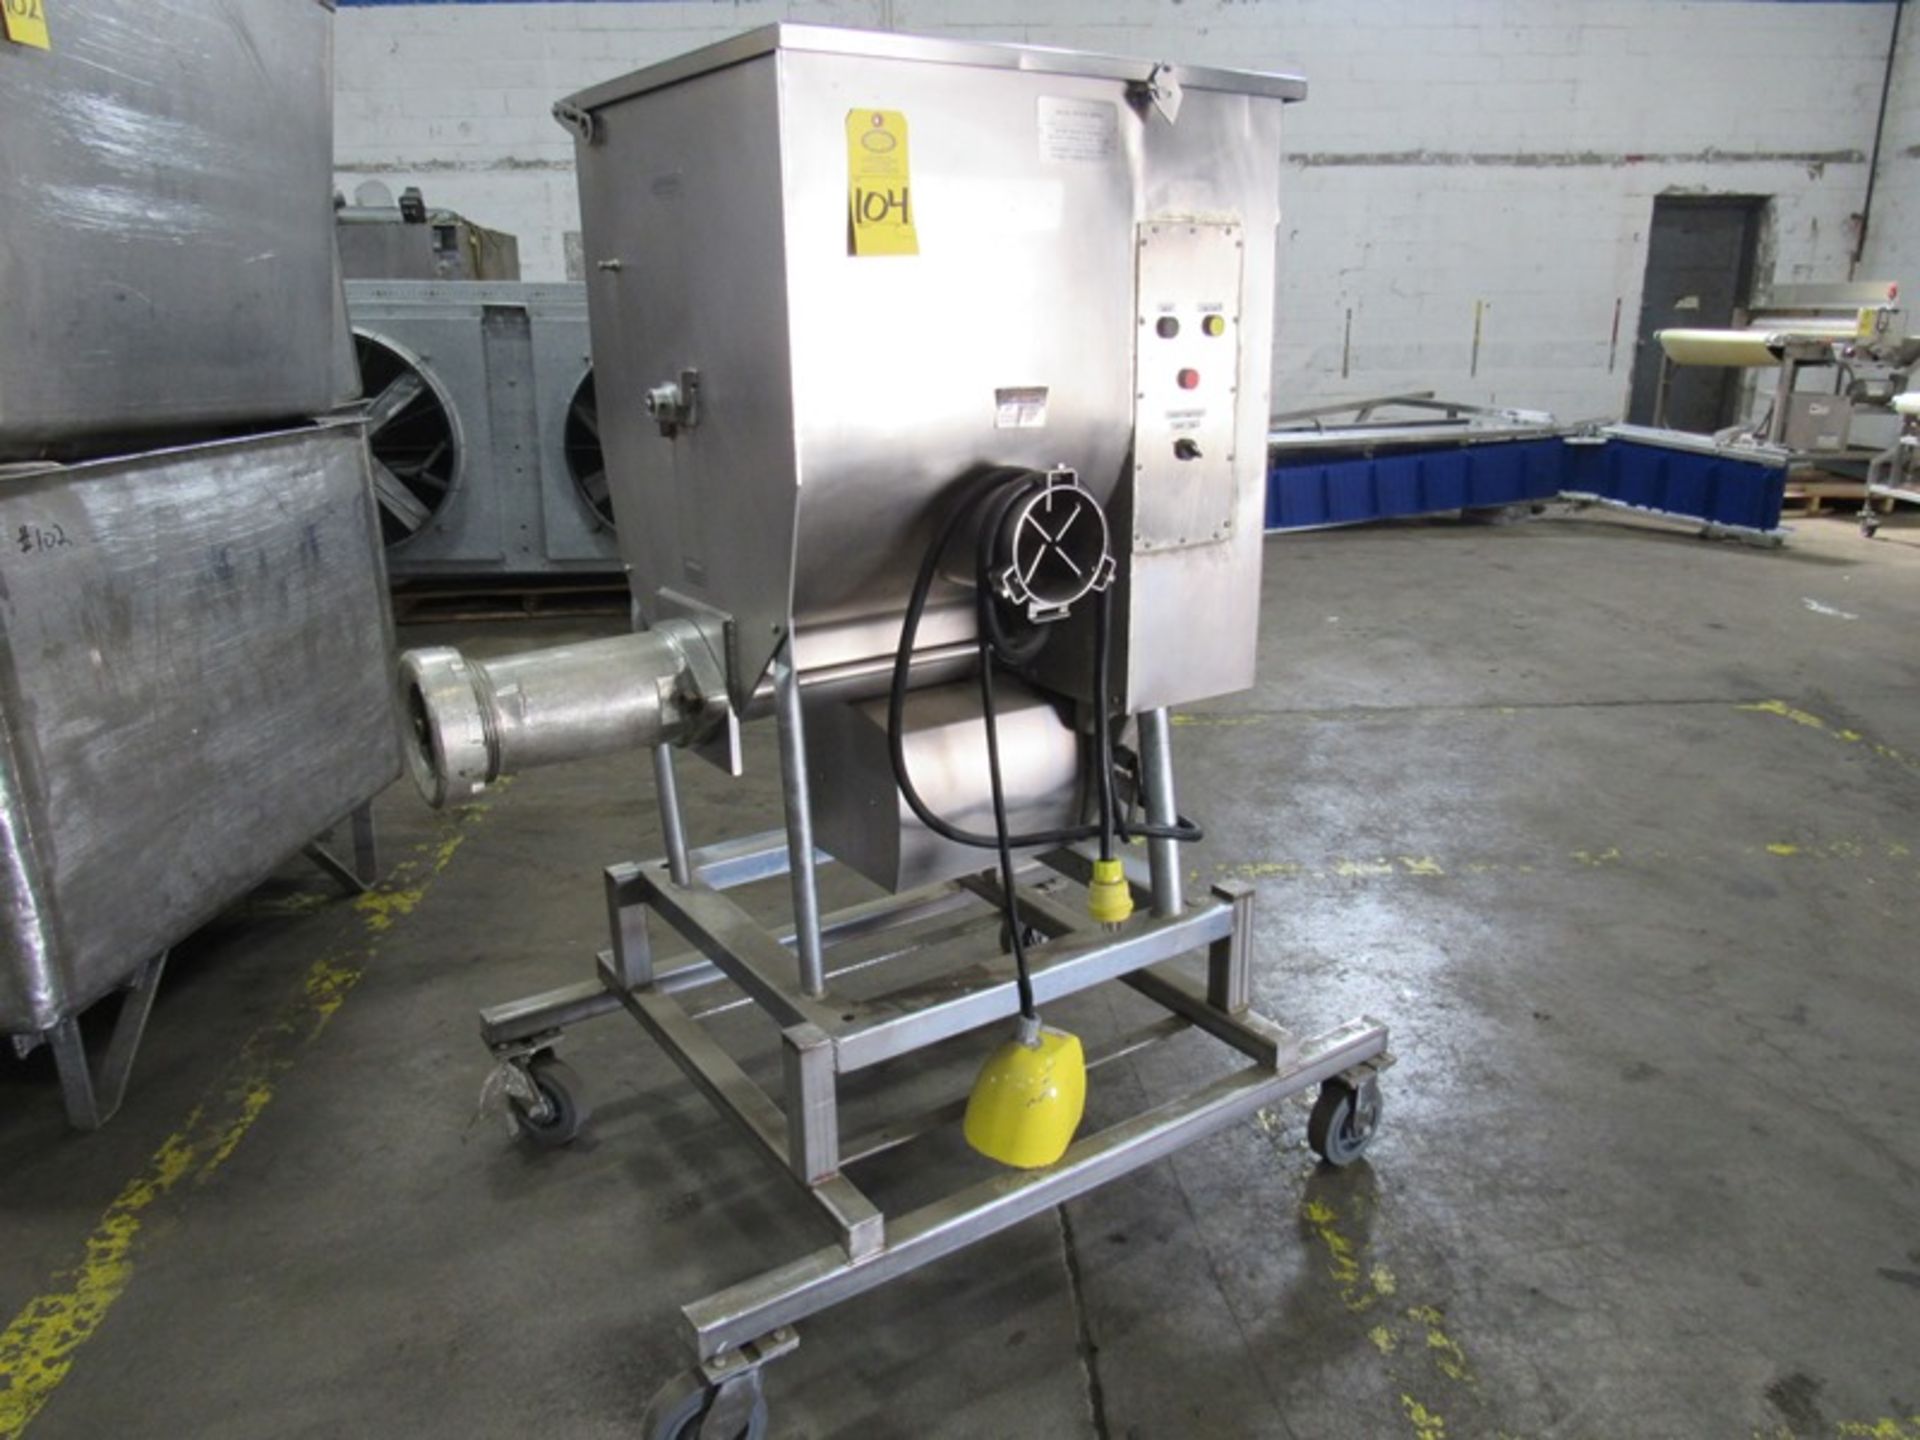 Hobart Mdl. 4352 Mixer/Grinder, Ser. #27-037-653, 5" plate on wheels, foot pedal activation, Located